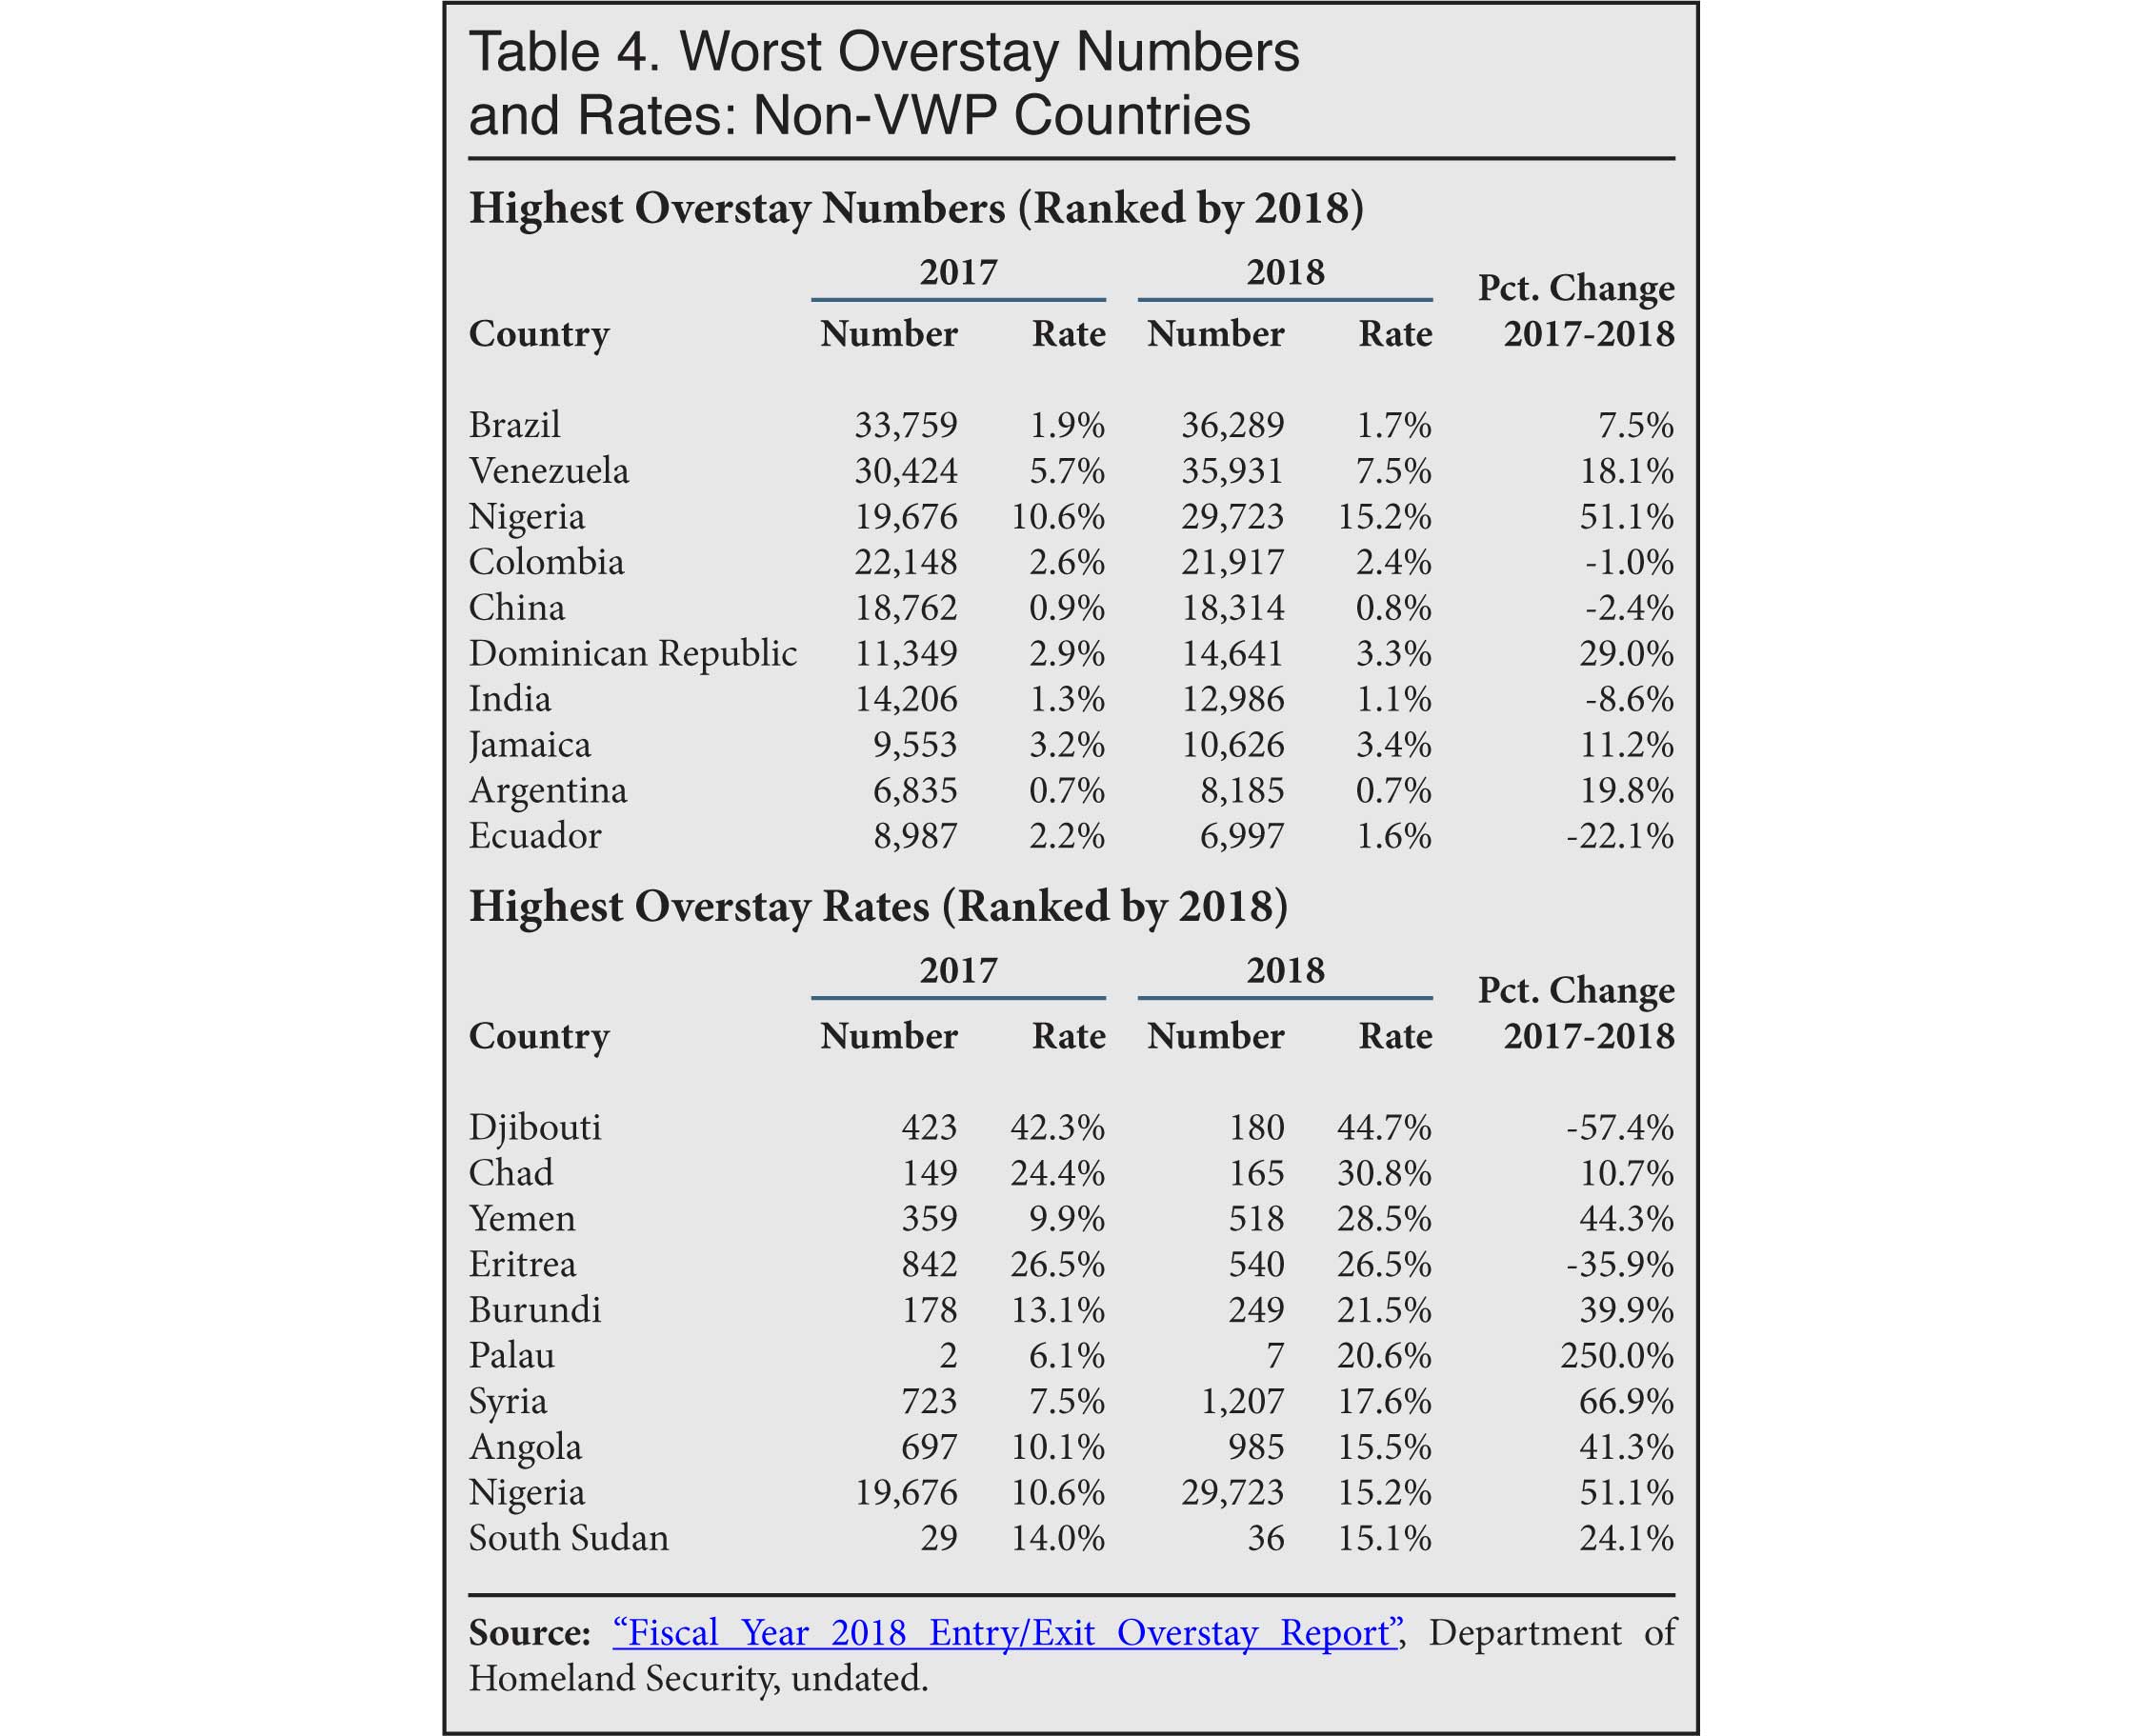 Table: Worst Overstay Numbers and Rates, Non-VWP Countries, 2018